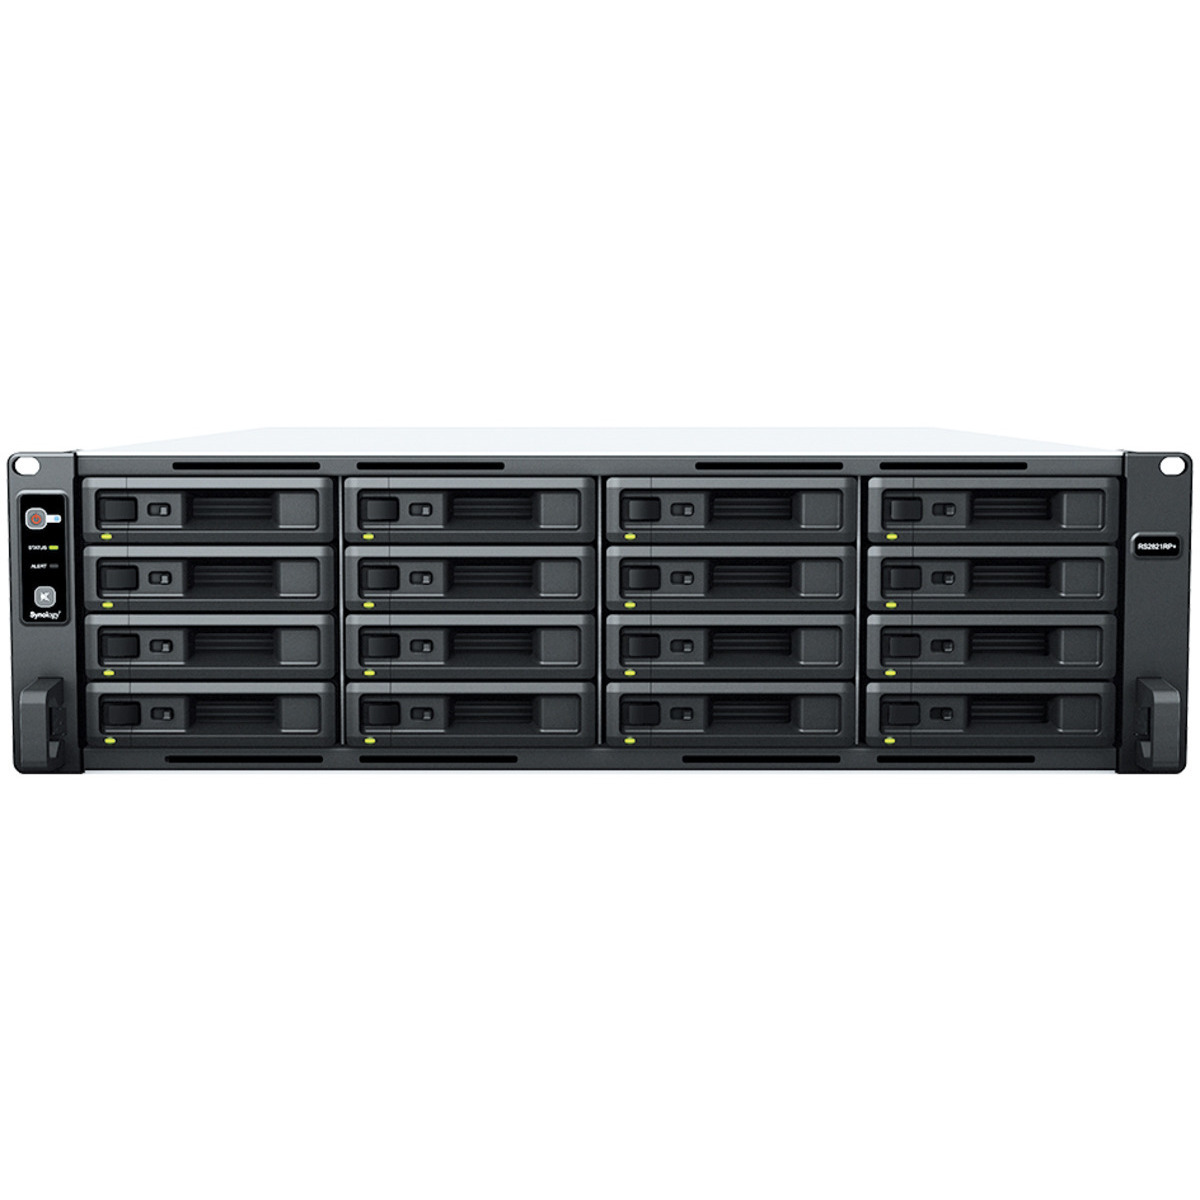 Synology RackStation RS2821RP+ 160tb 16-Bay RackMount Large Business / Enterprise NAS - Network Attached Storage Device 16x10tb Seagate EXOS X18 ST10000NM018G 3.5 7200rpm SATA 6Gb/s HDD ENTERPRISE Class Drives Installed - Burn-In Tested RackStation RS2821RP+